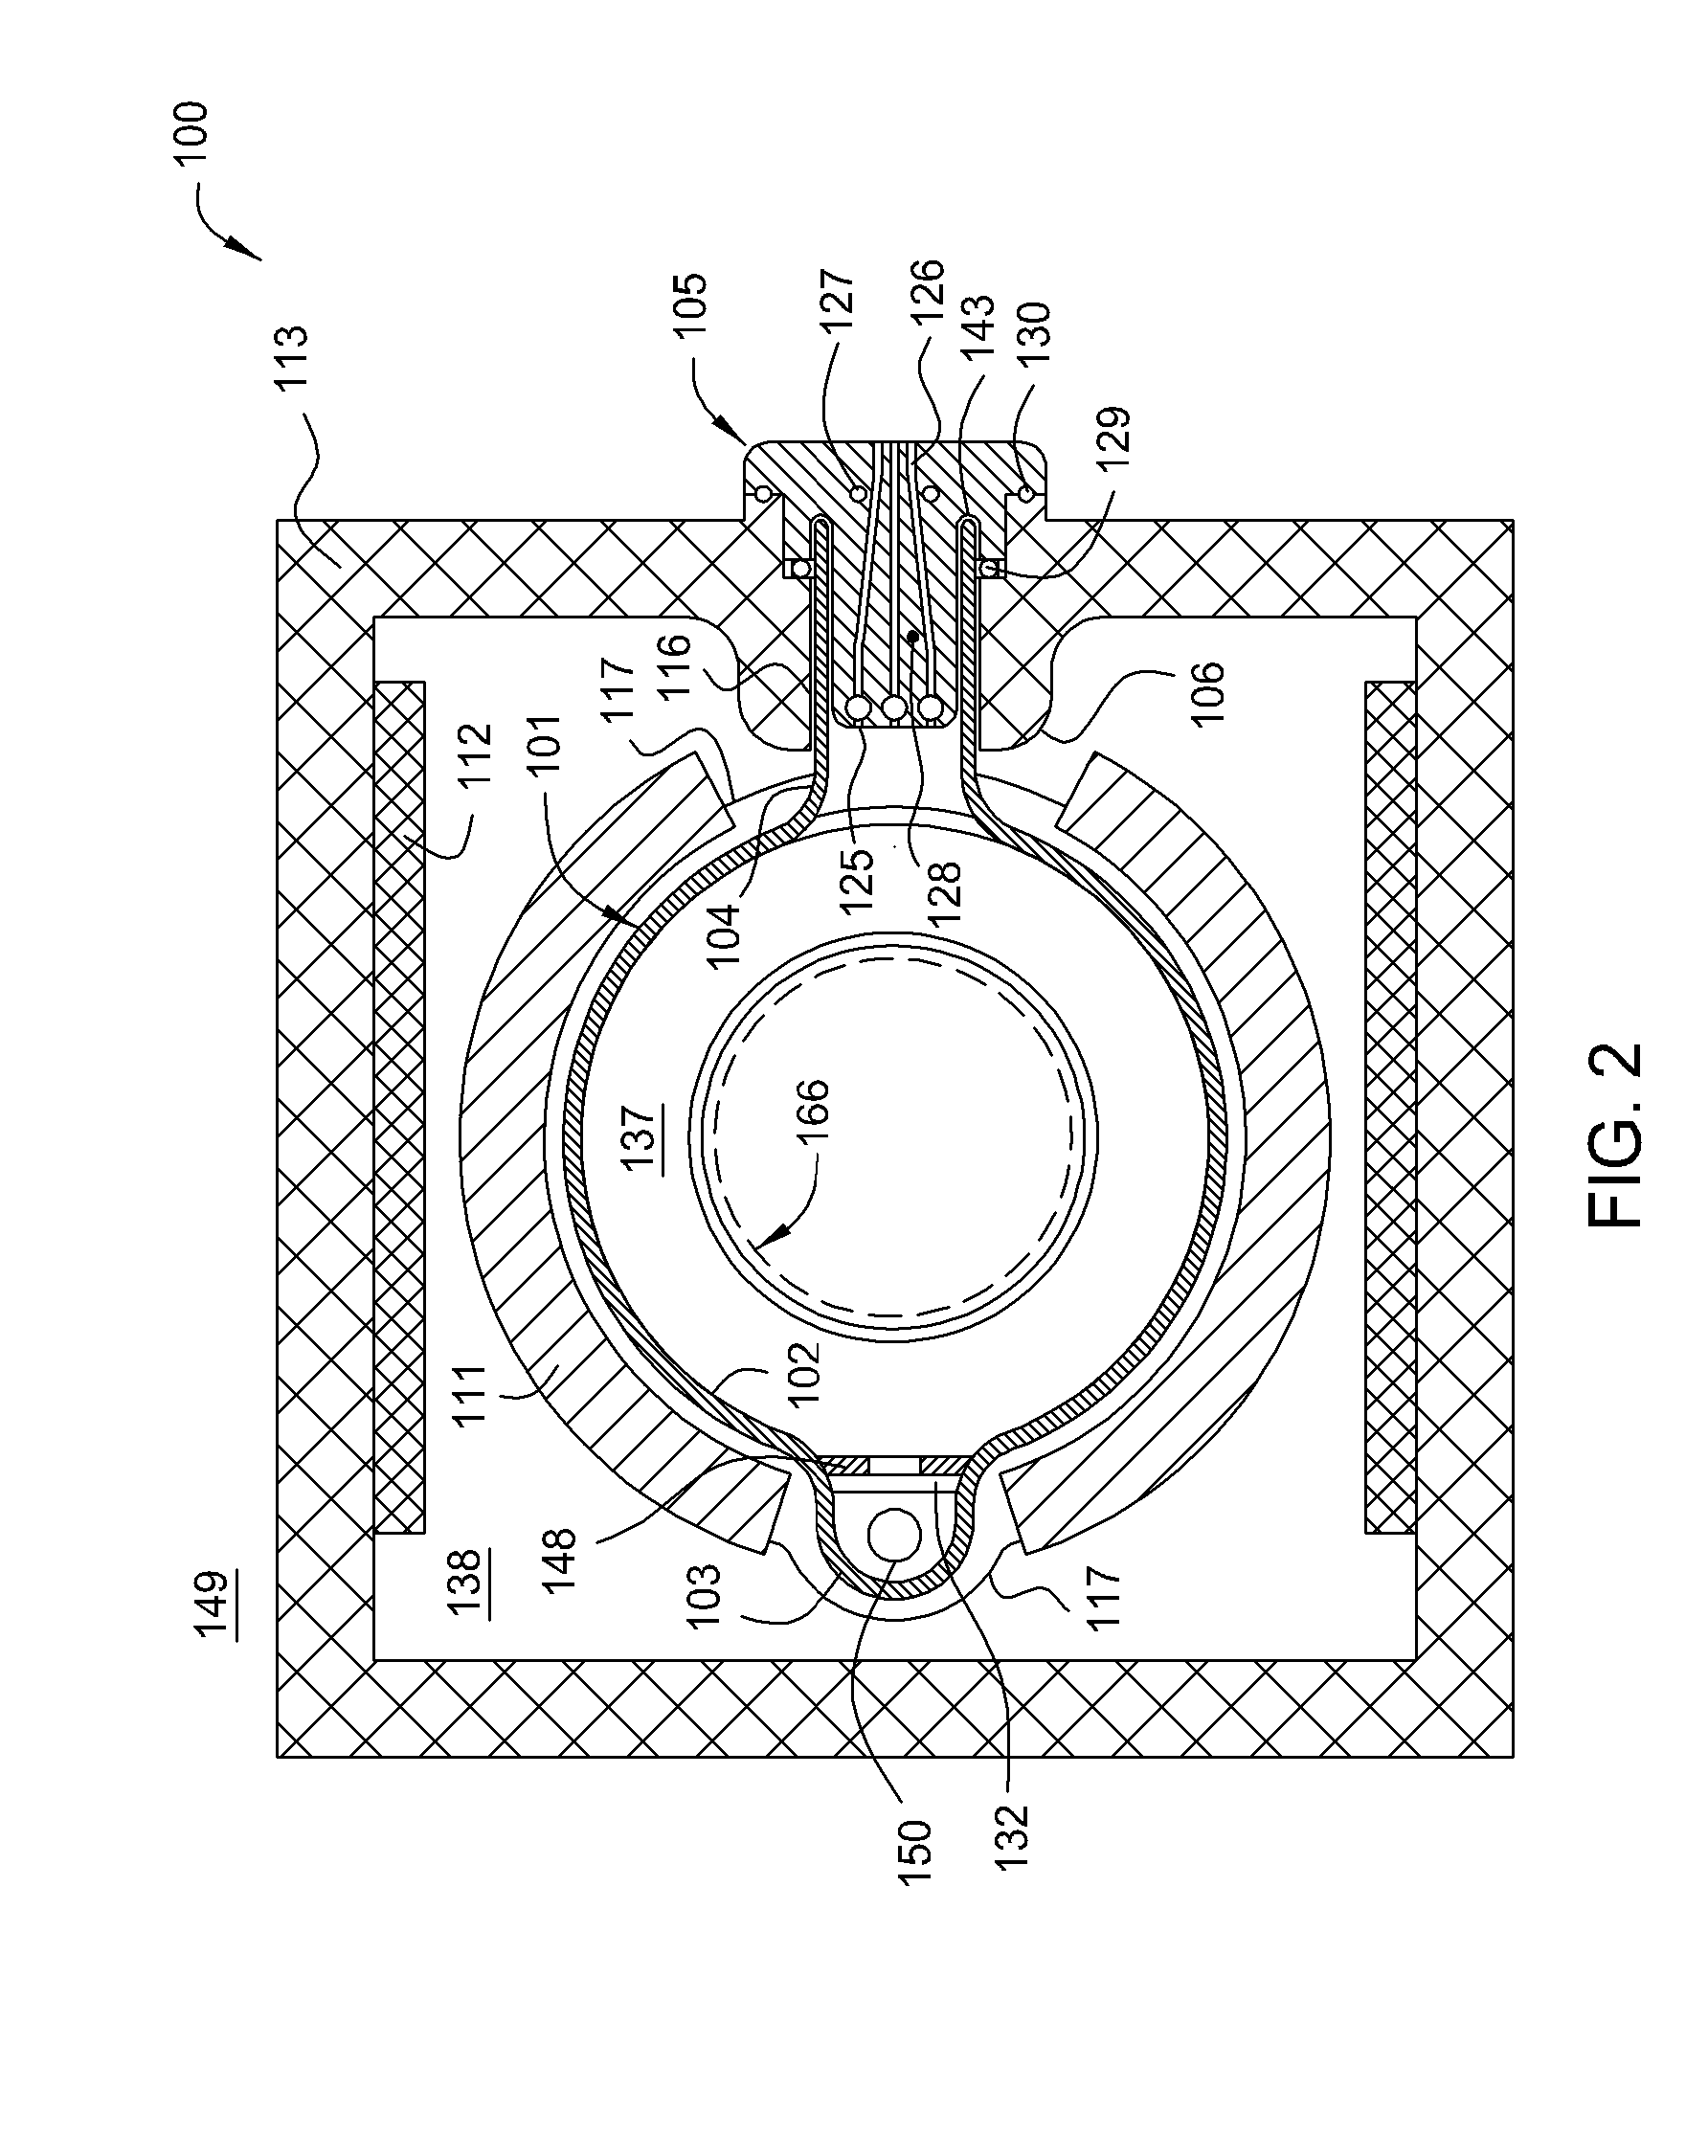 Thermal Batch Reactor with Removable Susceptors